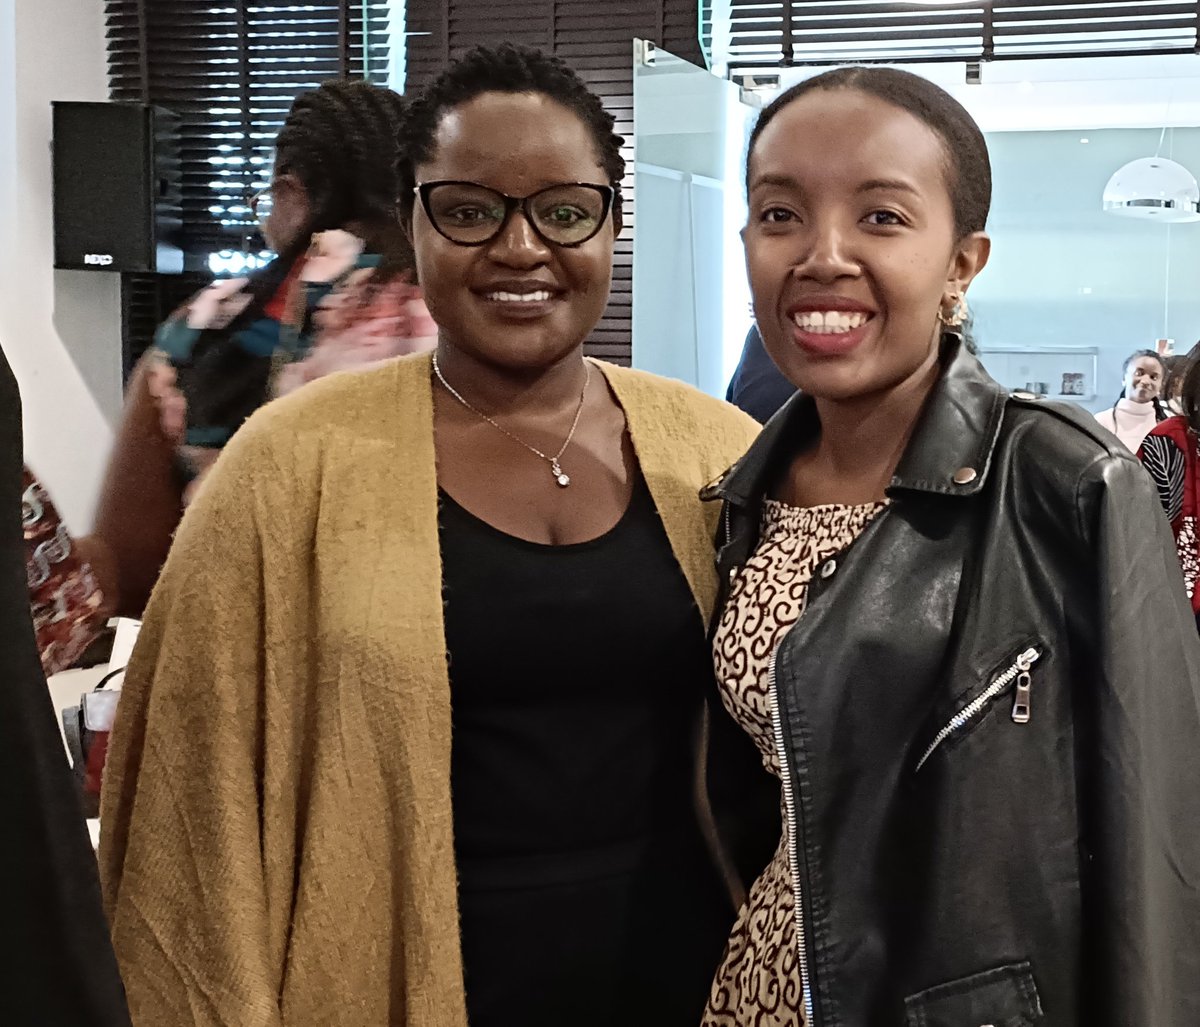 A Friday well spent among great women entrepreneurs as they shared on their founder stories. @EvaMuraya  @Ytherabeauty @FridaOwinga @EmmaMiloyo @kilimanispeaks  
#WomenEnterprenuers 
#Founders
#Womenfounders 
#stories